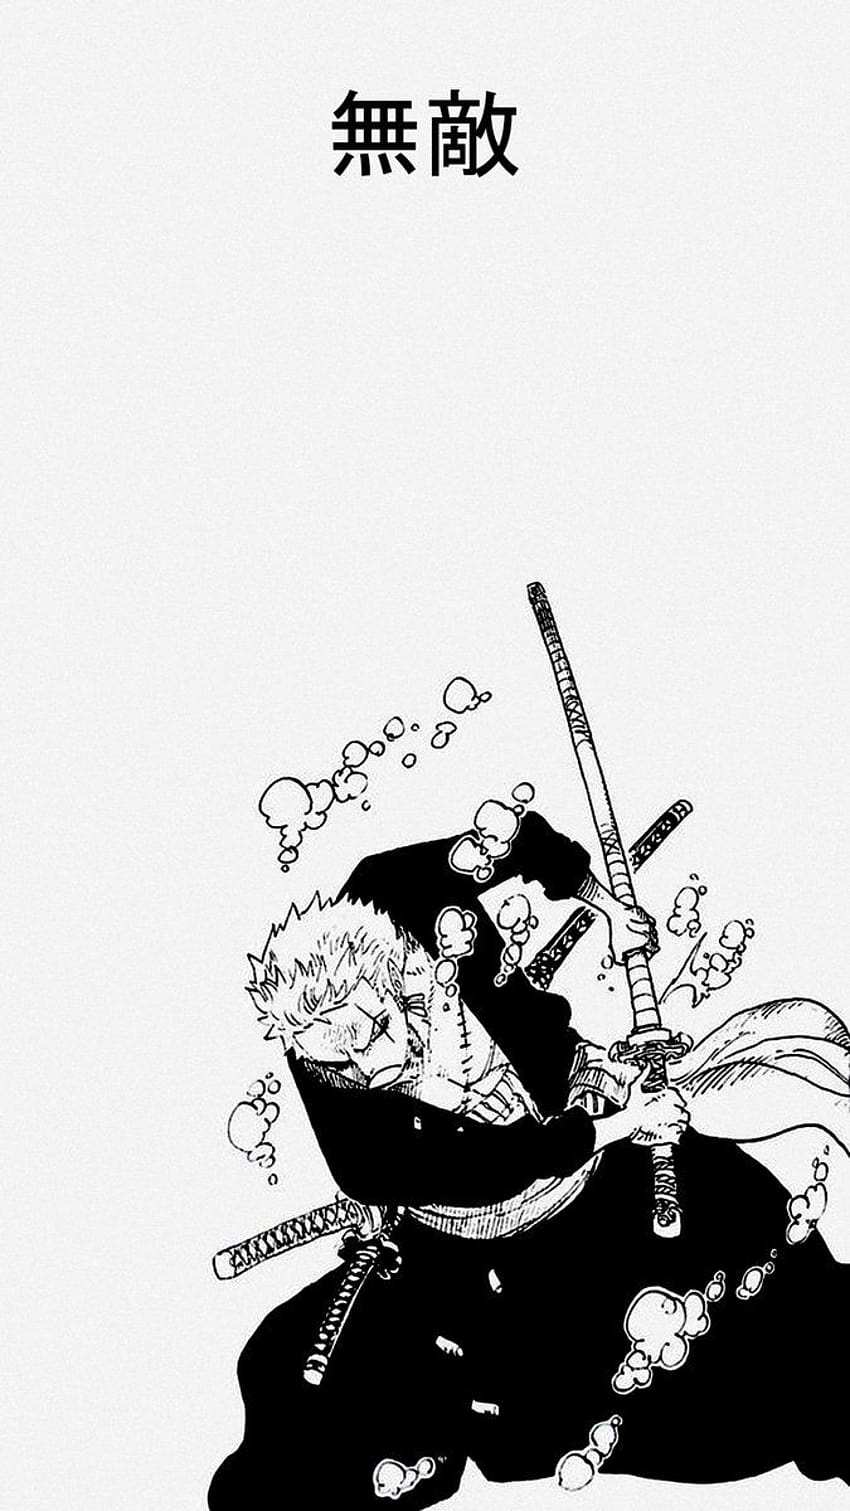 One Piece chapter 993 - Sanji's drawing of the fight - One Piece